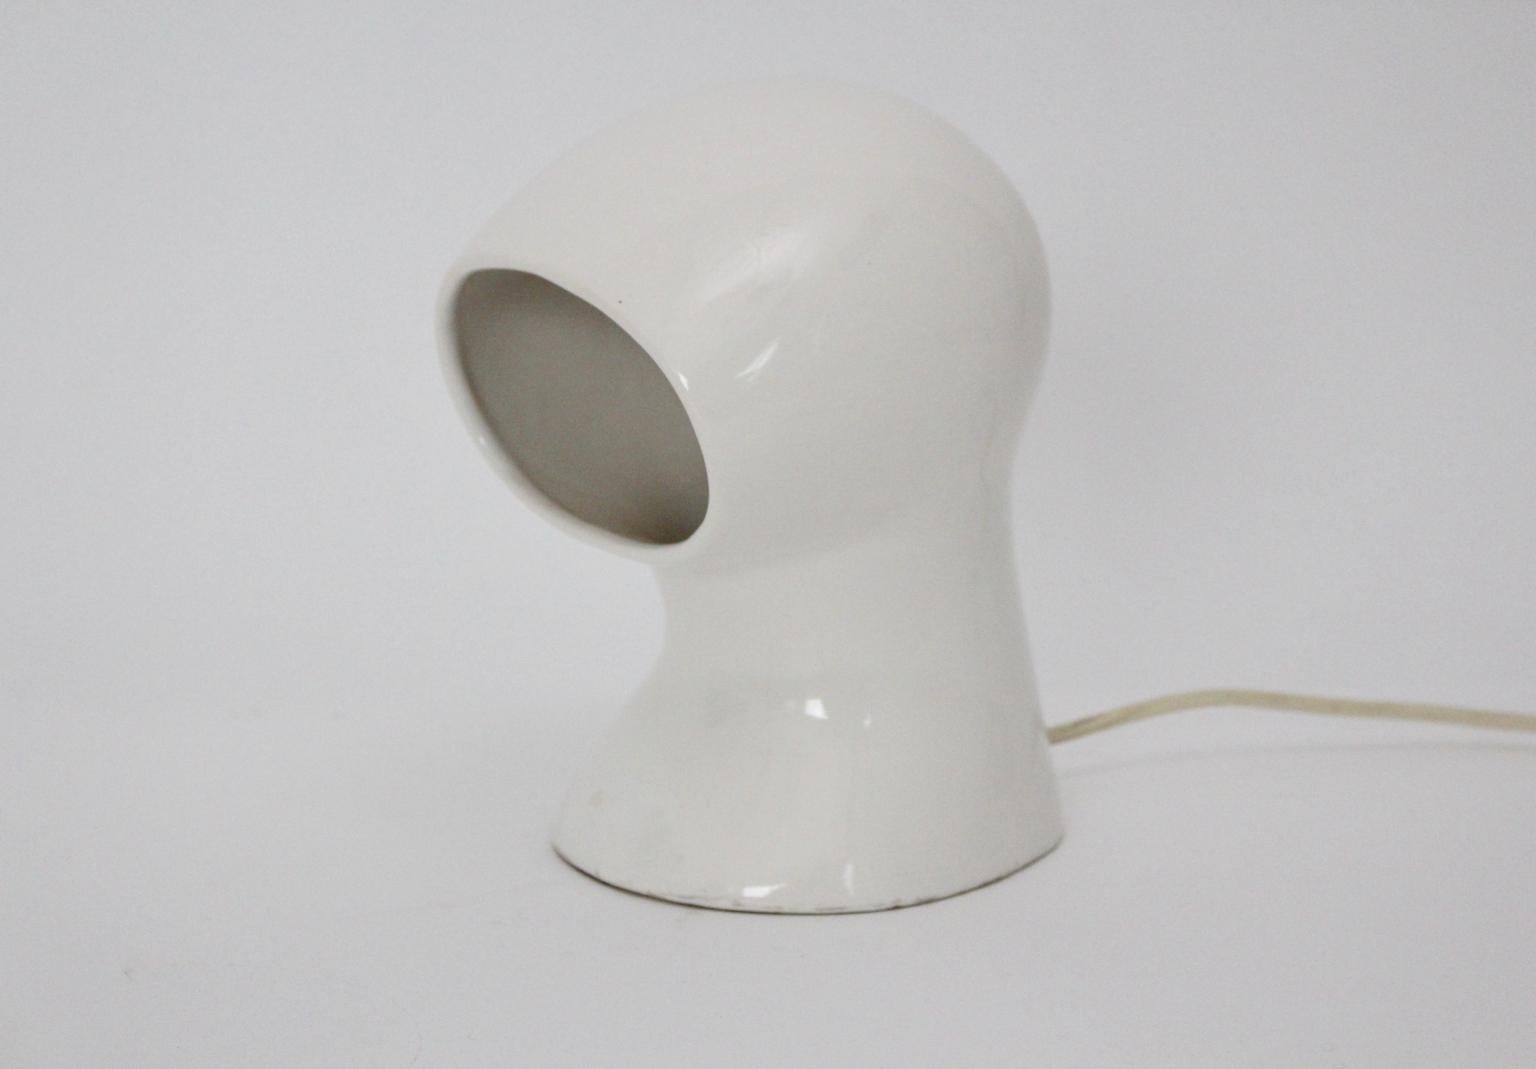 Space Age 20th century table lamp from ceramic in white color 1960s.
Wonderful ceramic table lamp with a glossy surface, which set apart from other Space Age table lamps through its tranquil and sleek appearance.
One E 27 socket.
The vintage